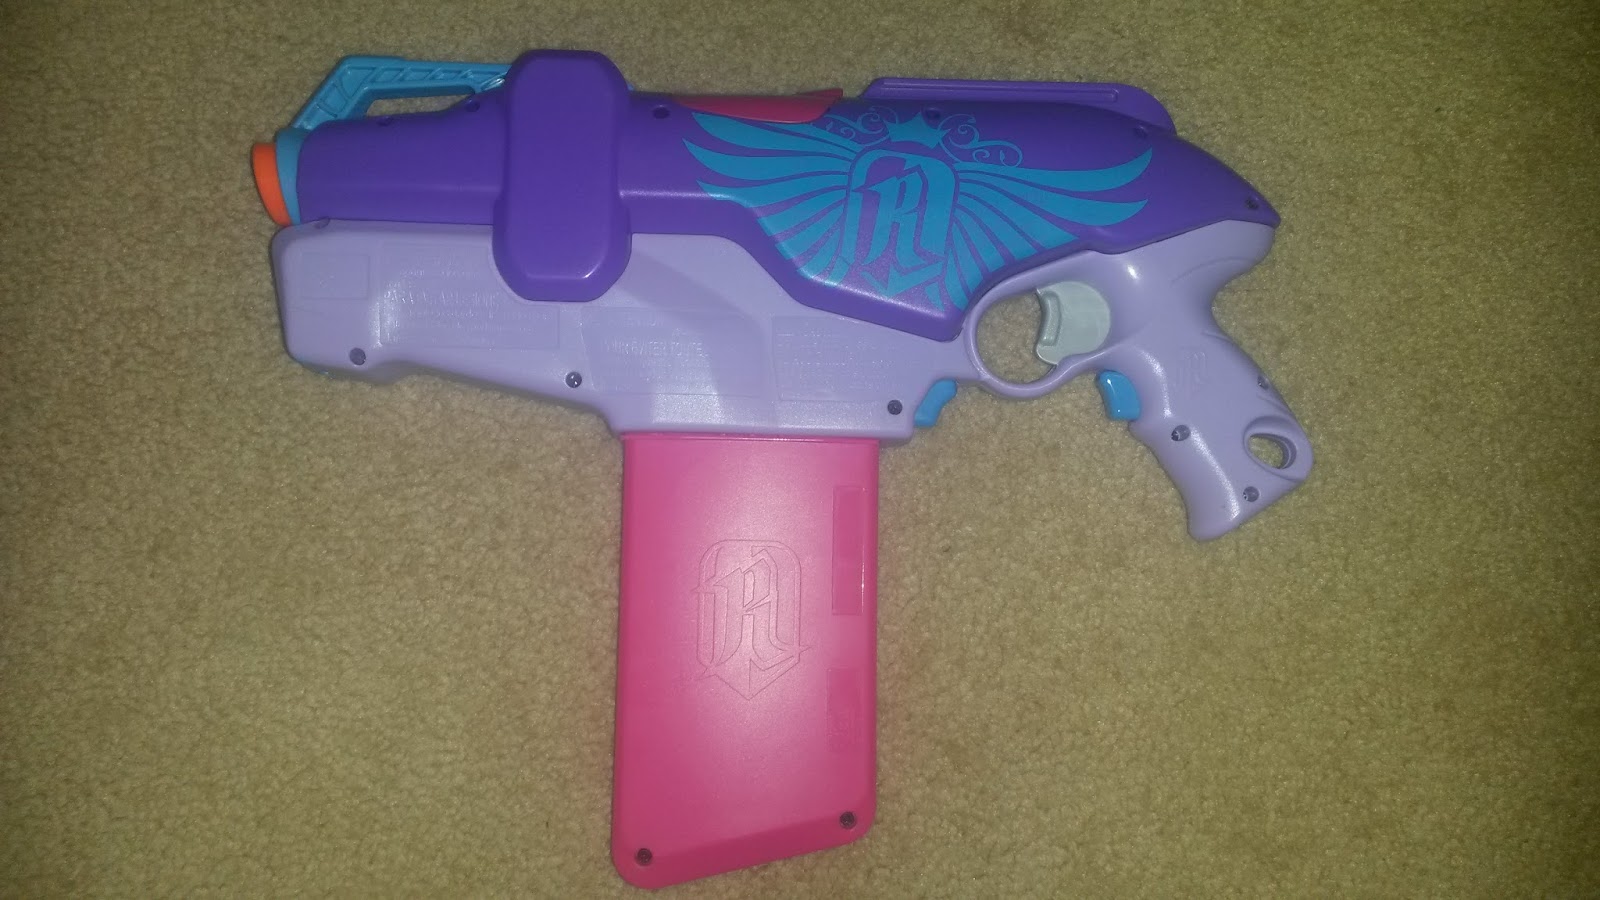 REVIEW] Nerf Rebelle Rapid Red Blaster Unboxing, Review, & Firing Test 